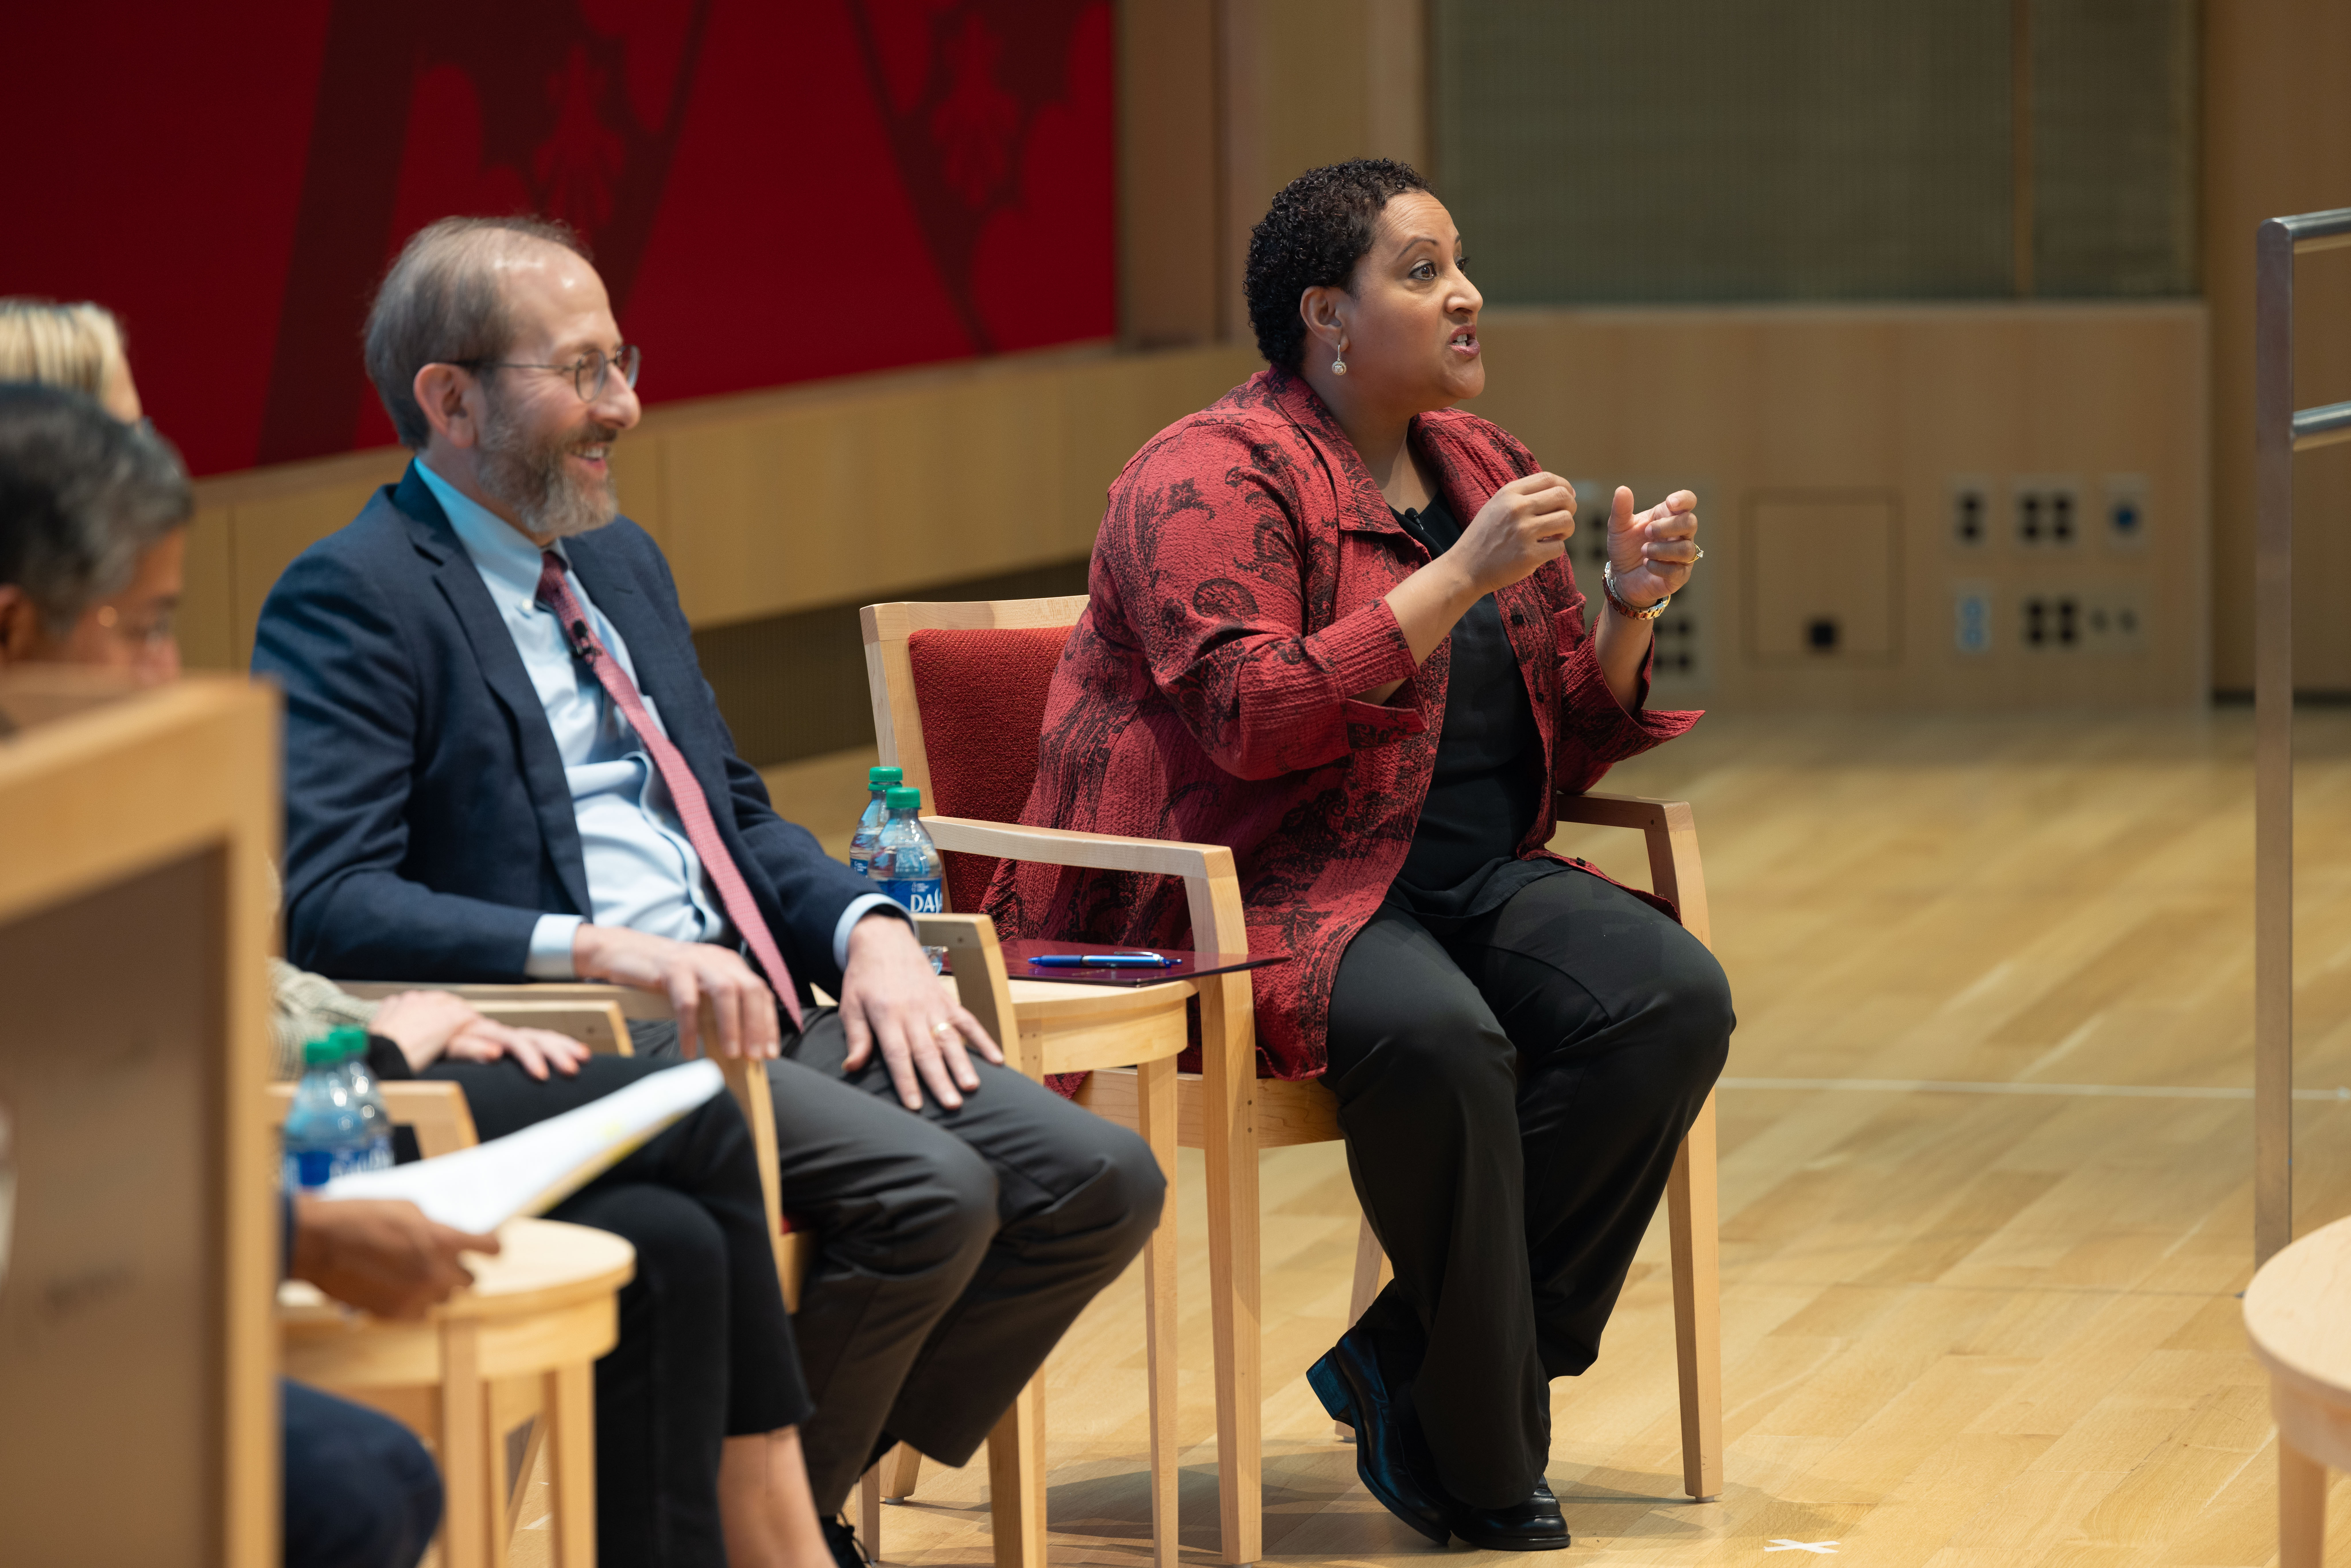 Afternoon plenary session. (Our speakers from left to right) Bharat Anand, Amanda Claybaugh, Provost Alan M. Garber, Tsedal Neeley. Tsedal Neeley in conversation with audience.